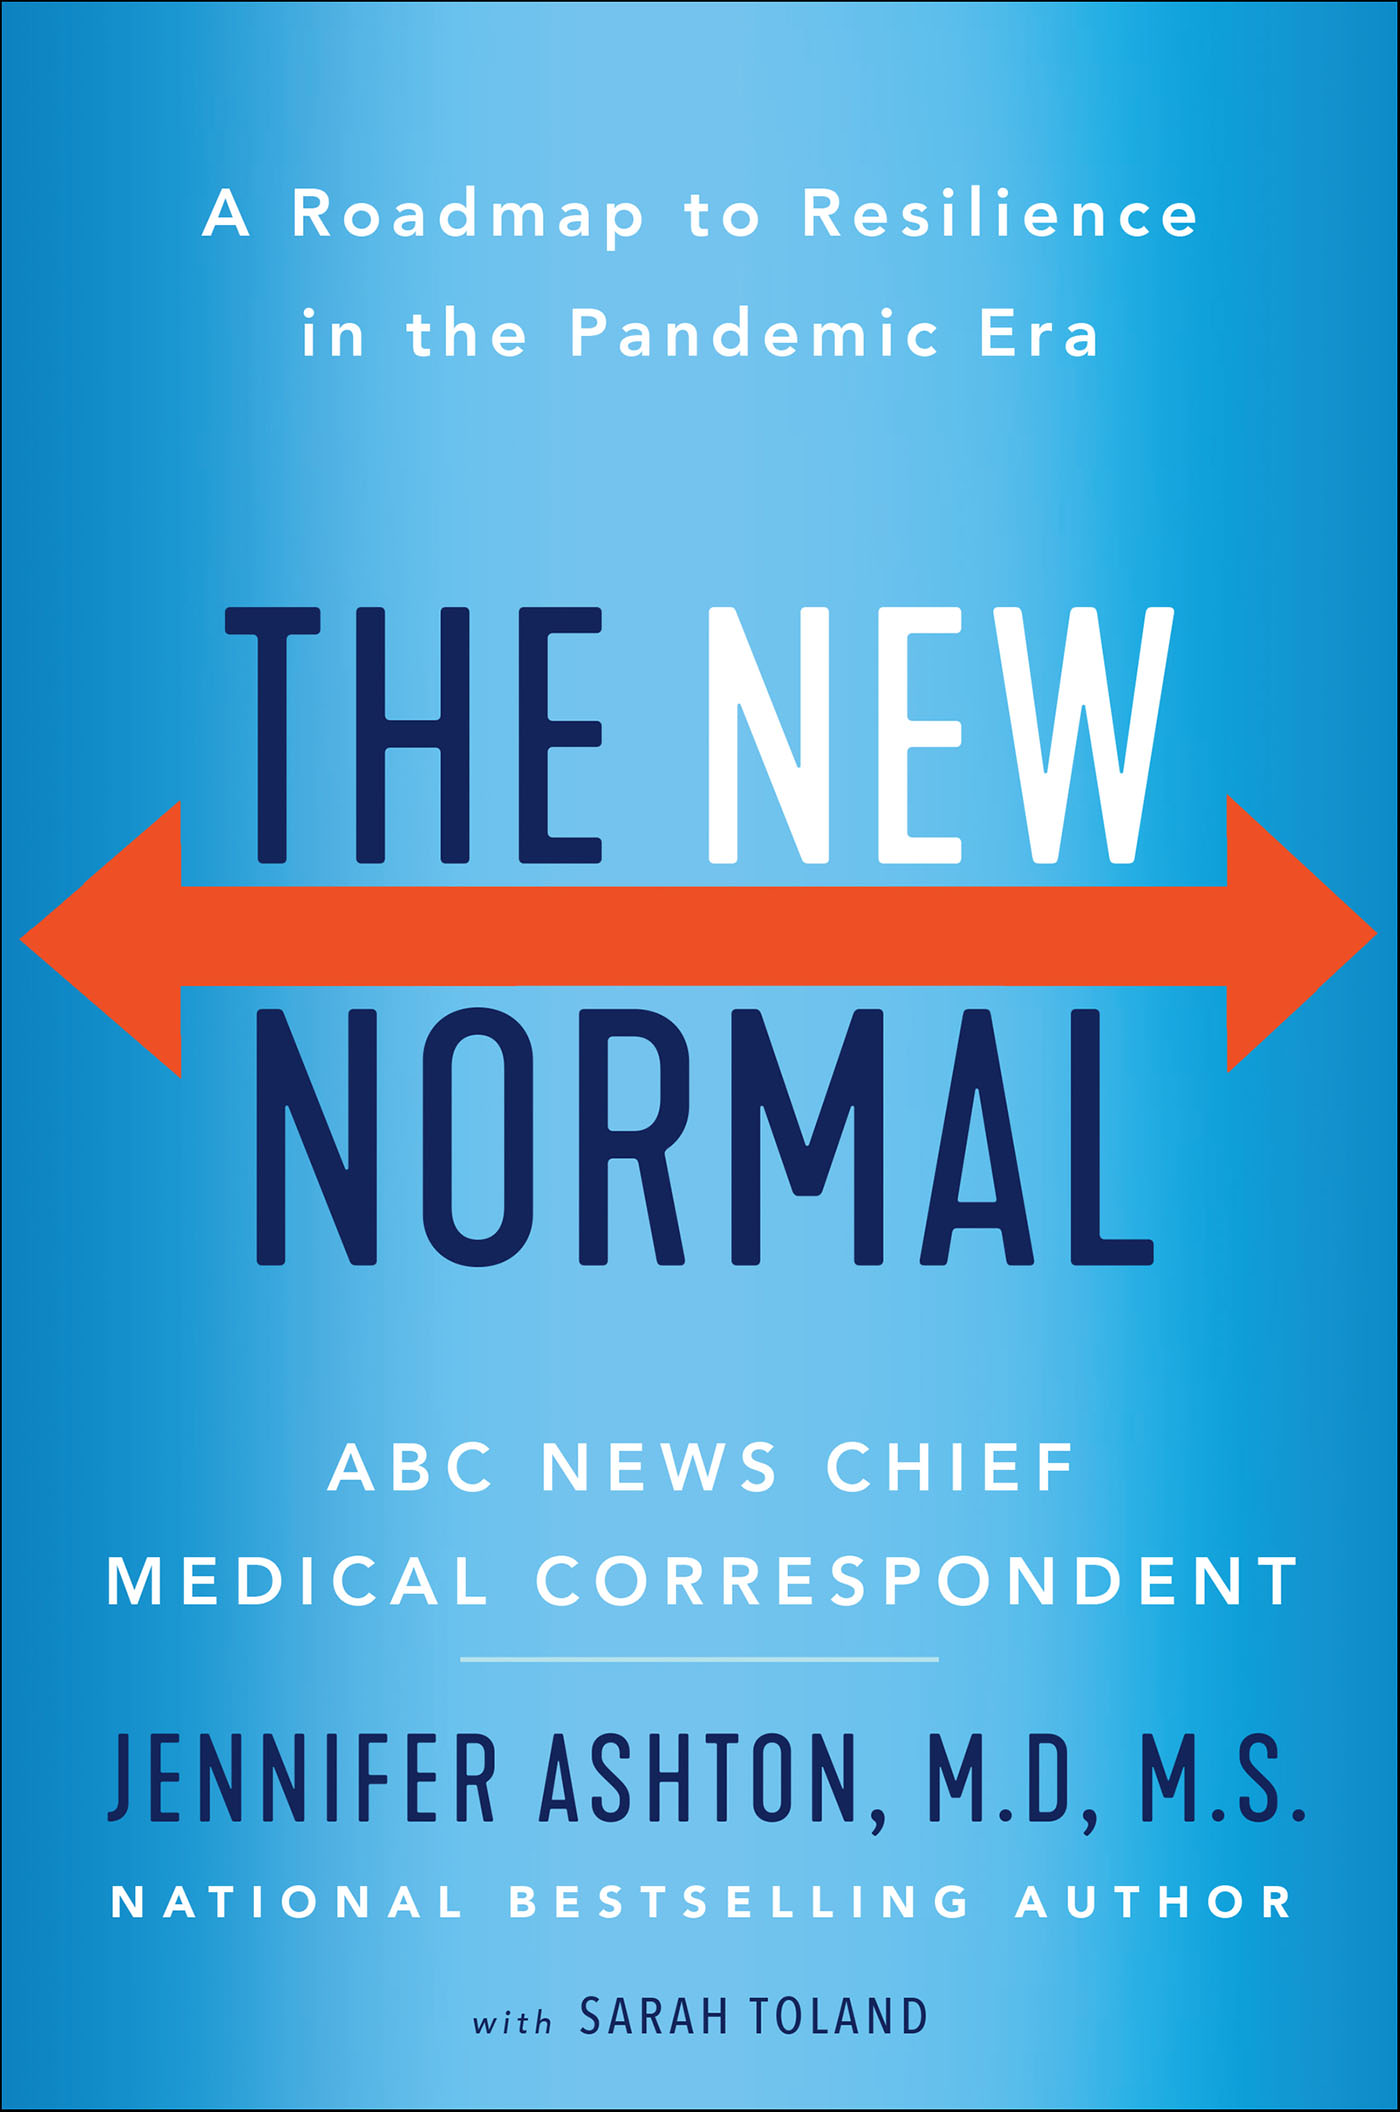 Image de couverture de The New Normal [electronic resource] : A Roadmap to Resilience in the Pandemic Era